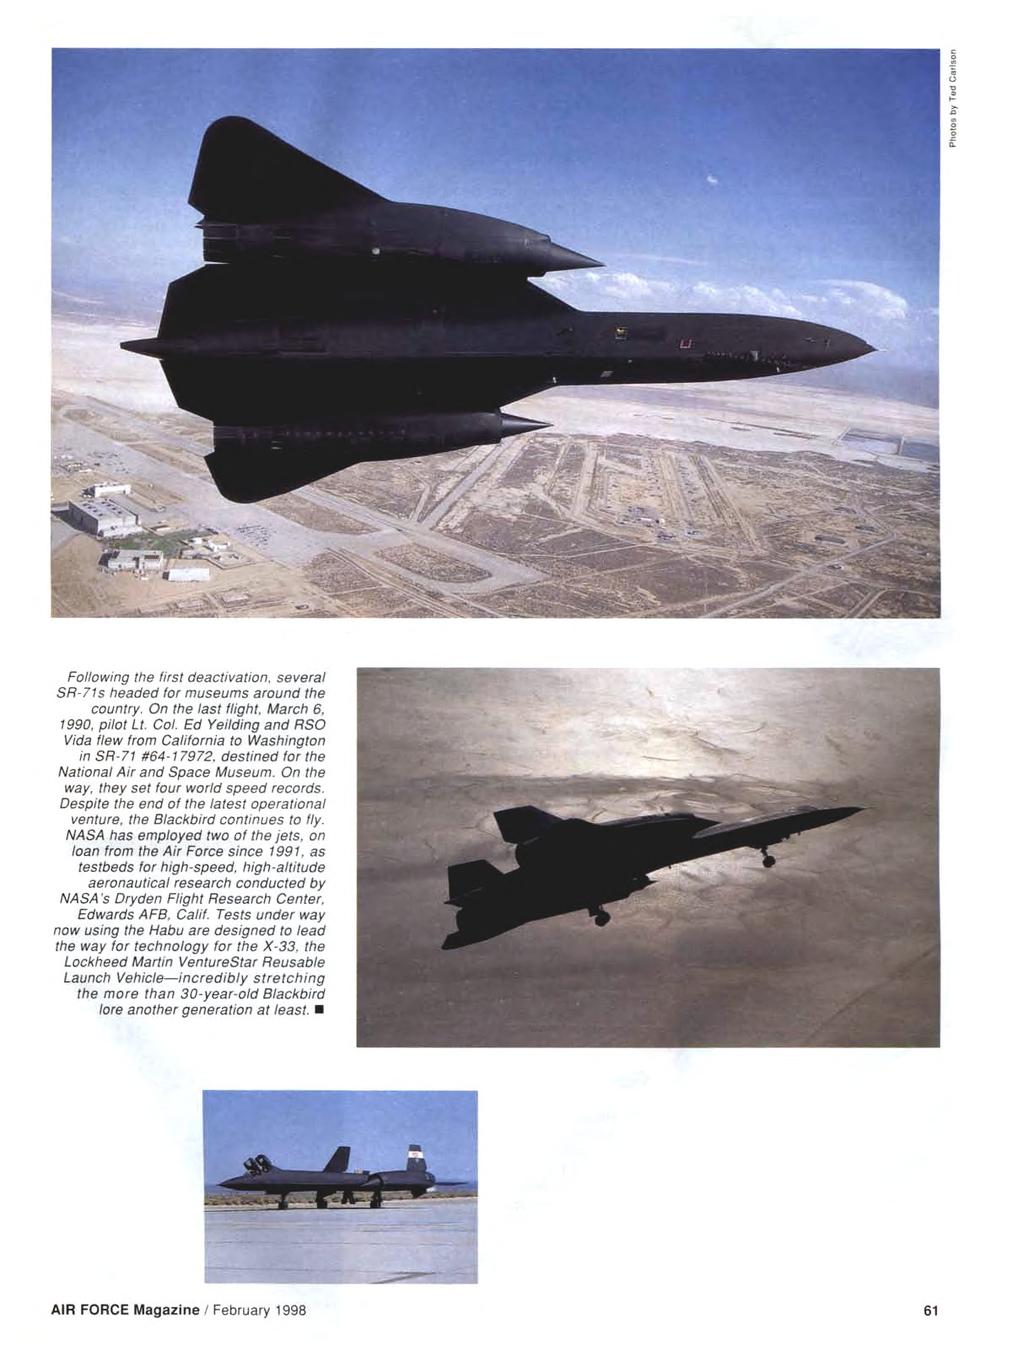 Following the first deactivation, several SR-71s headed for museums around the country. On the last flight. March 6, 1990, pilot Lt. Col.